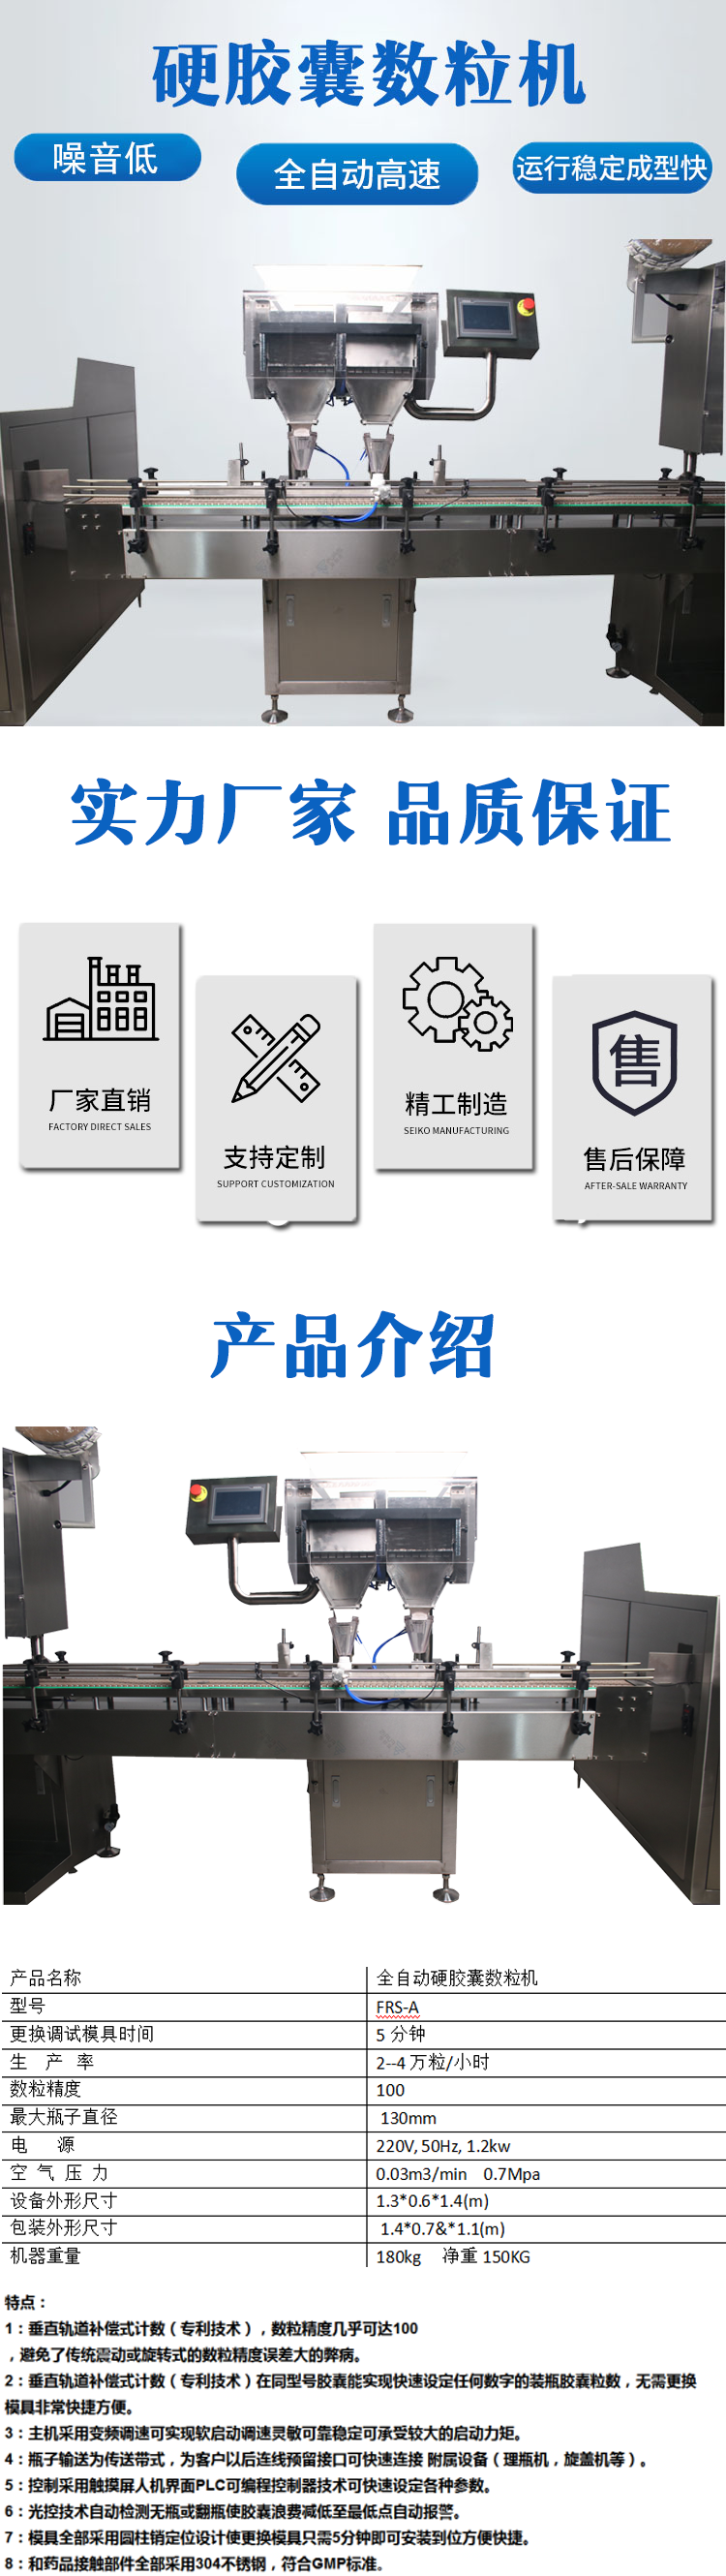 Fully automatic hard capsule counting machine Capsule and tablet filling machine Pill and tablet bottling machine